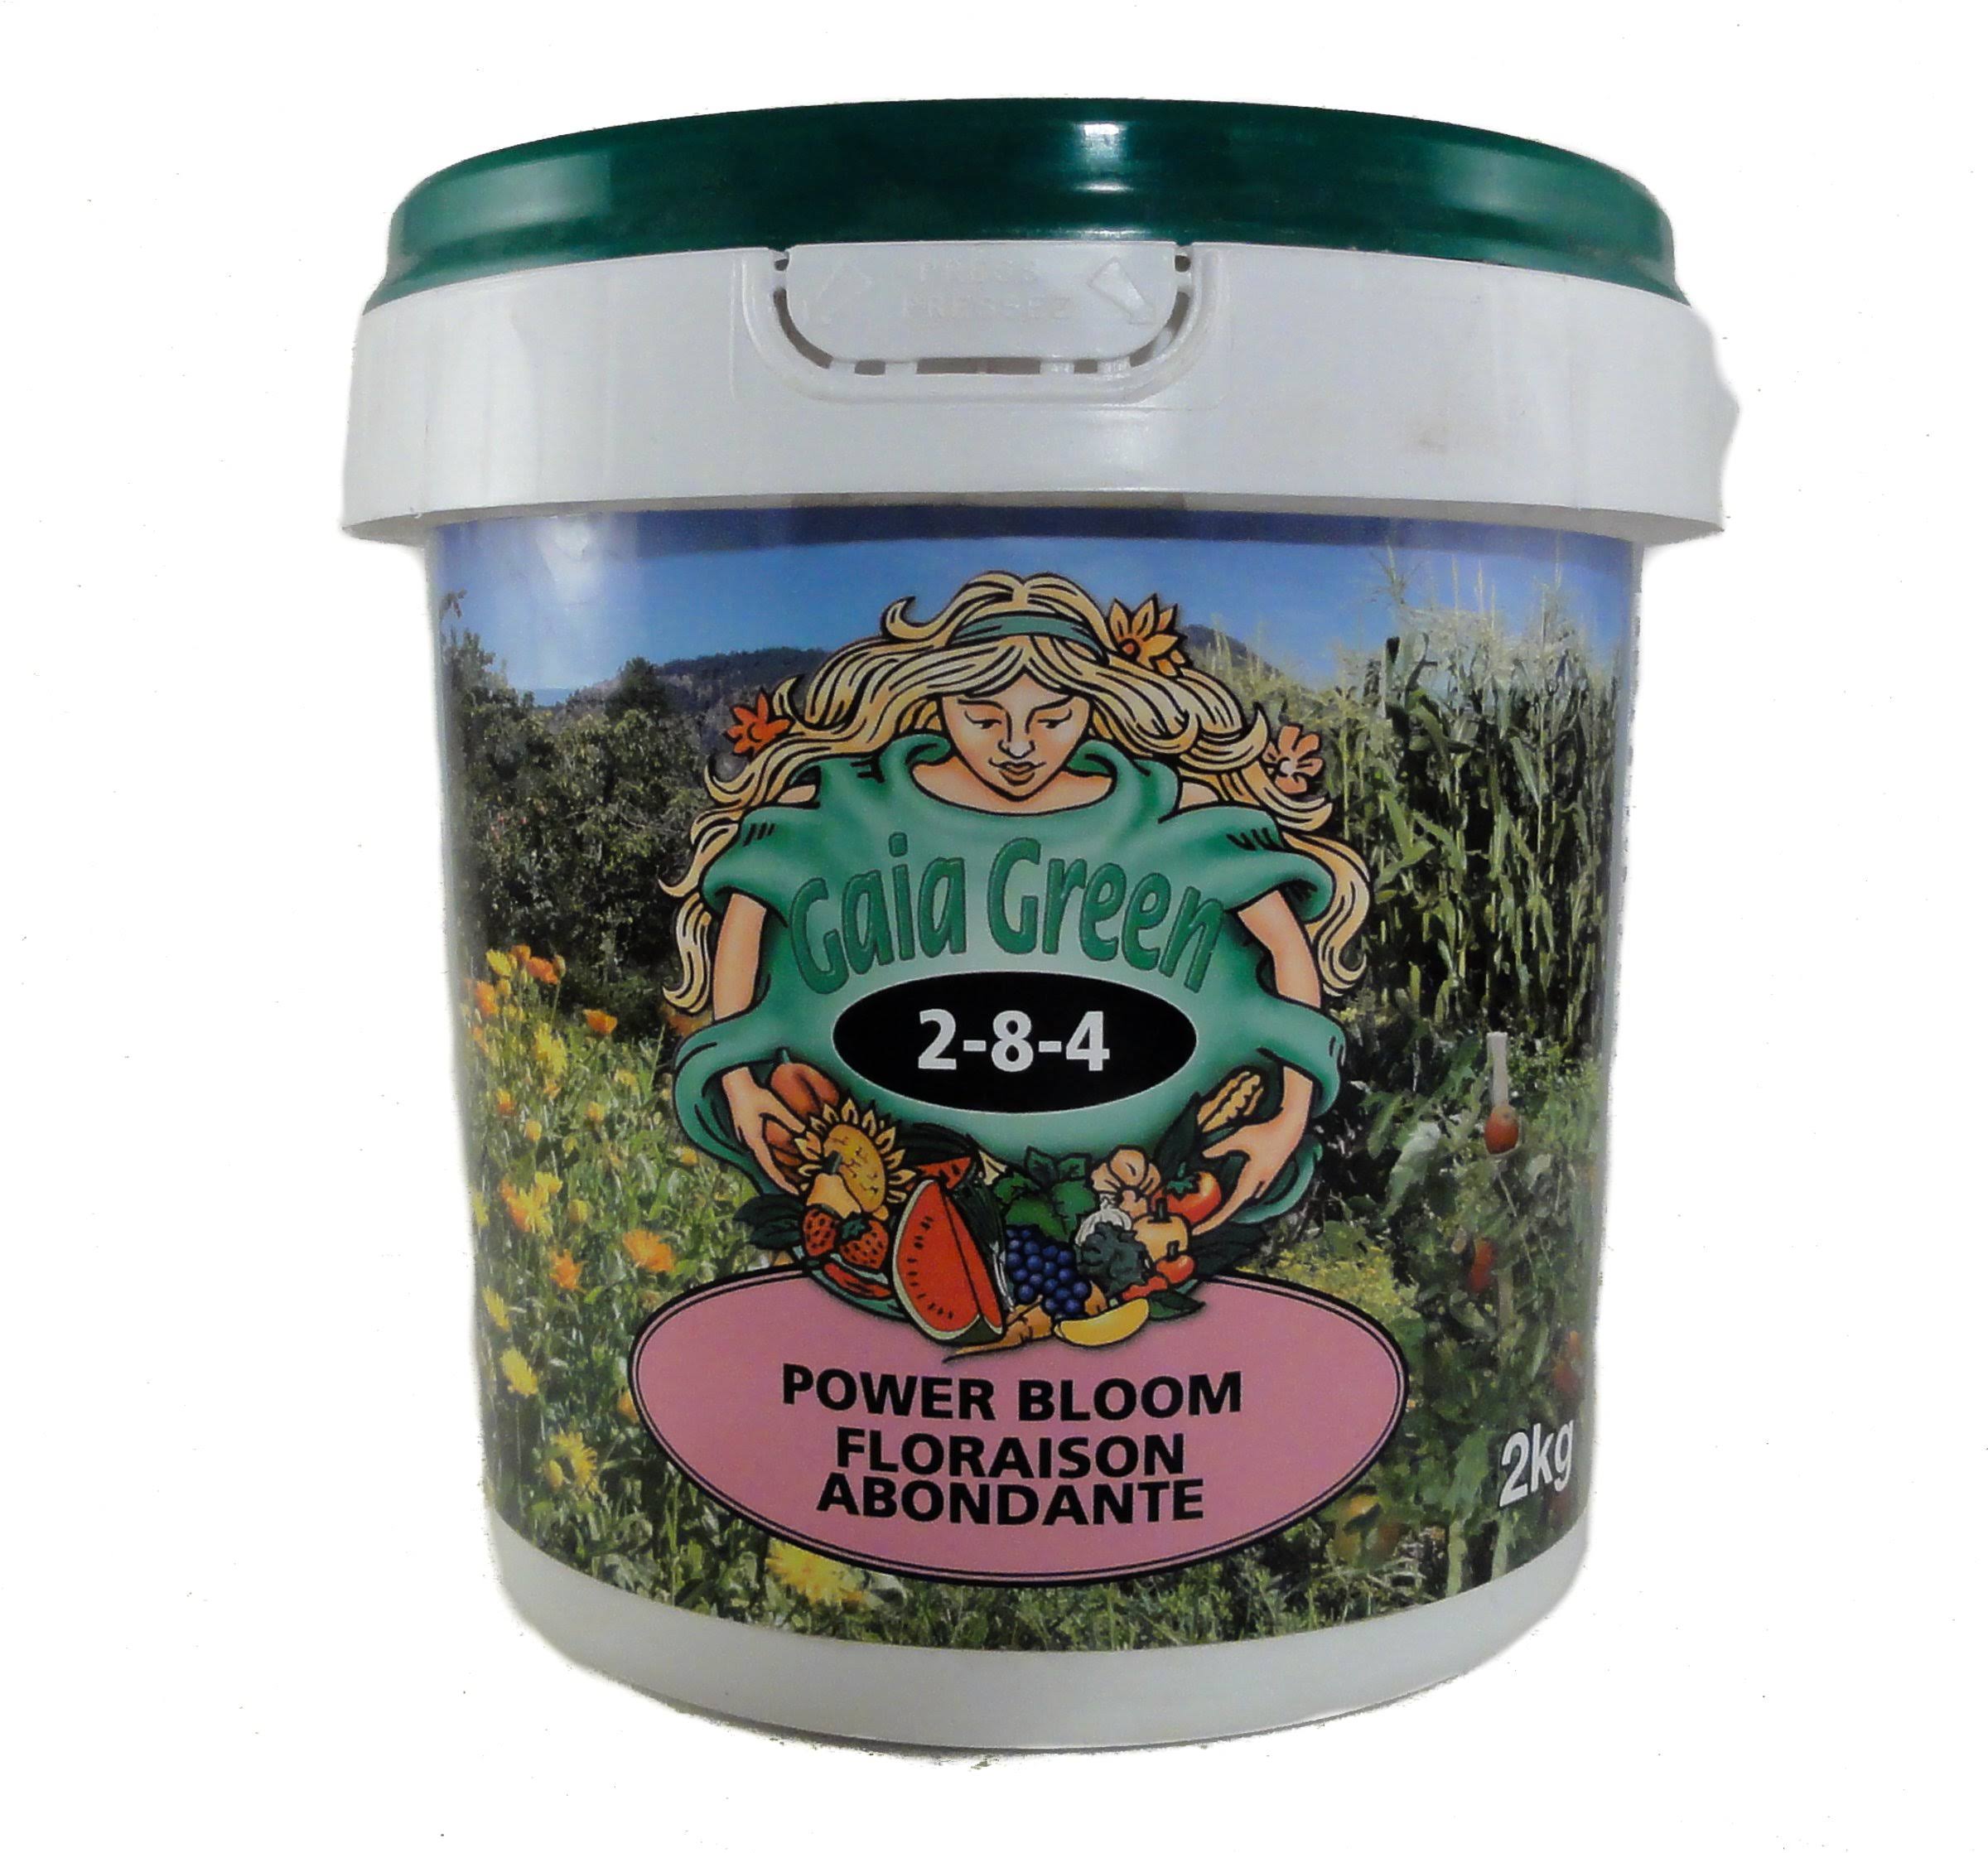 Gaia Green 2-8-4 Power Bloom 2kg - Great for Bigger Flowers, More Tomatoes, and Healthier Plants